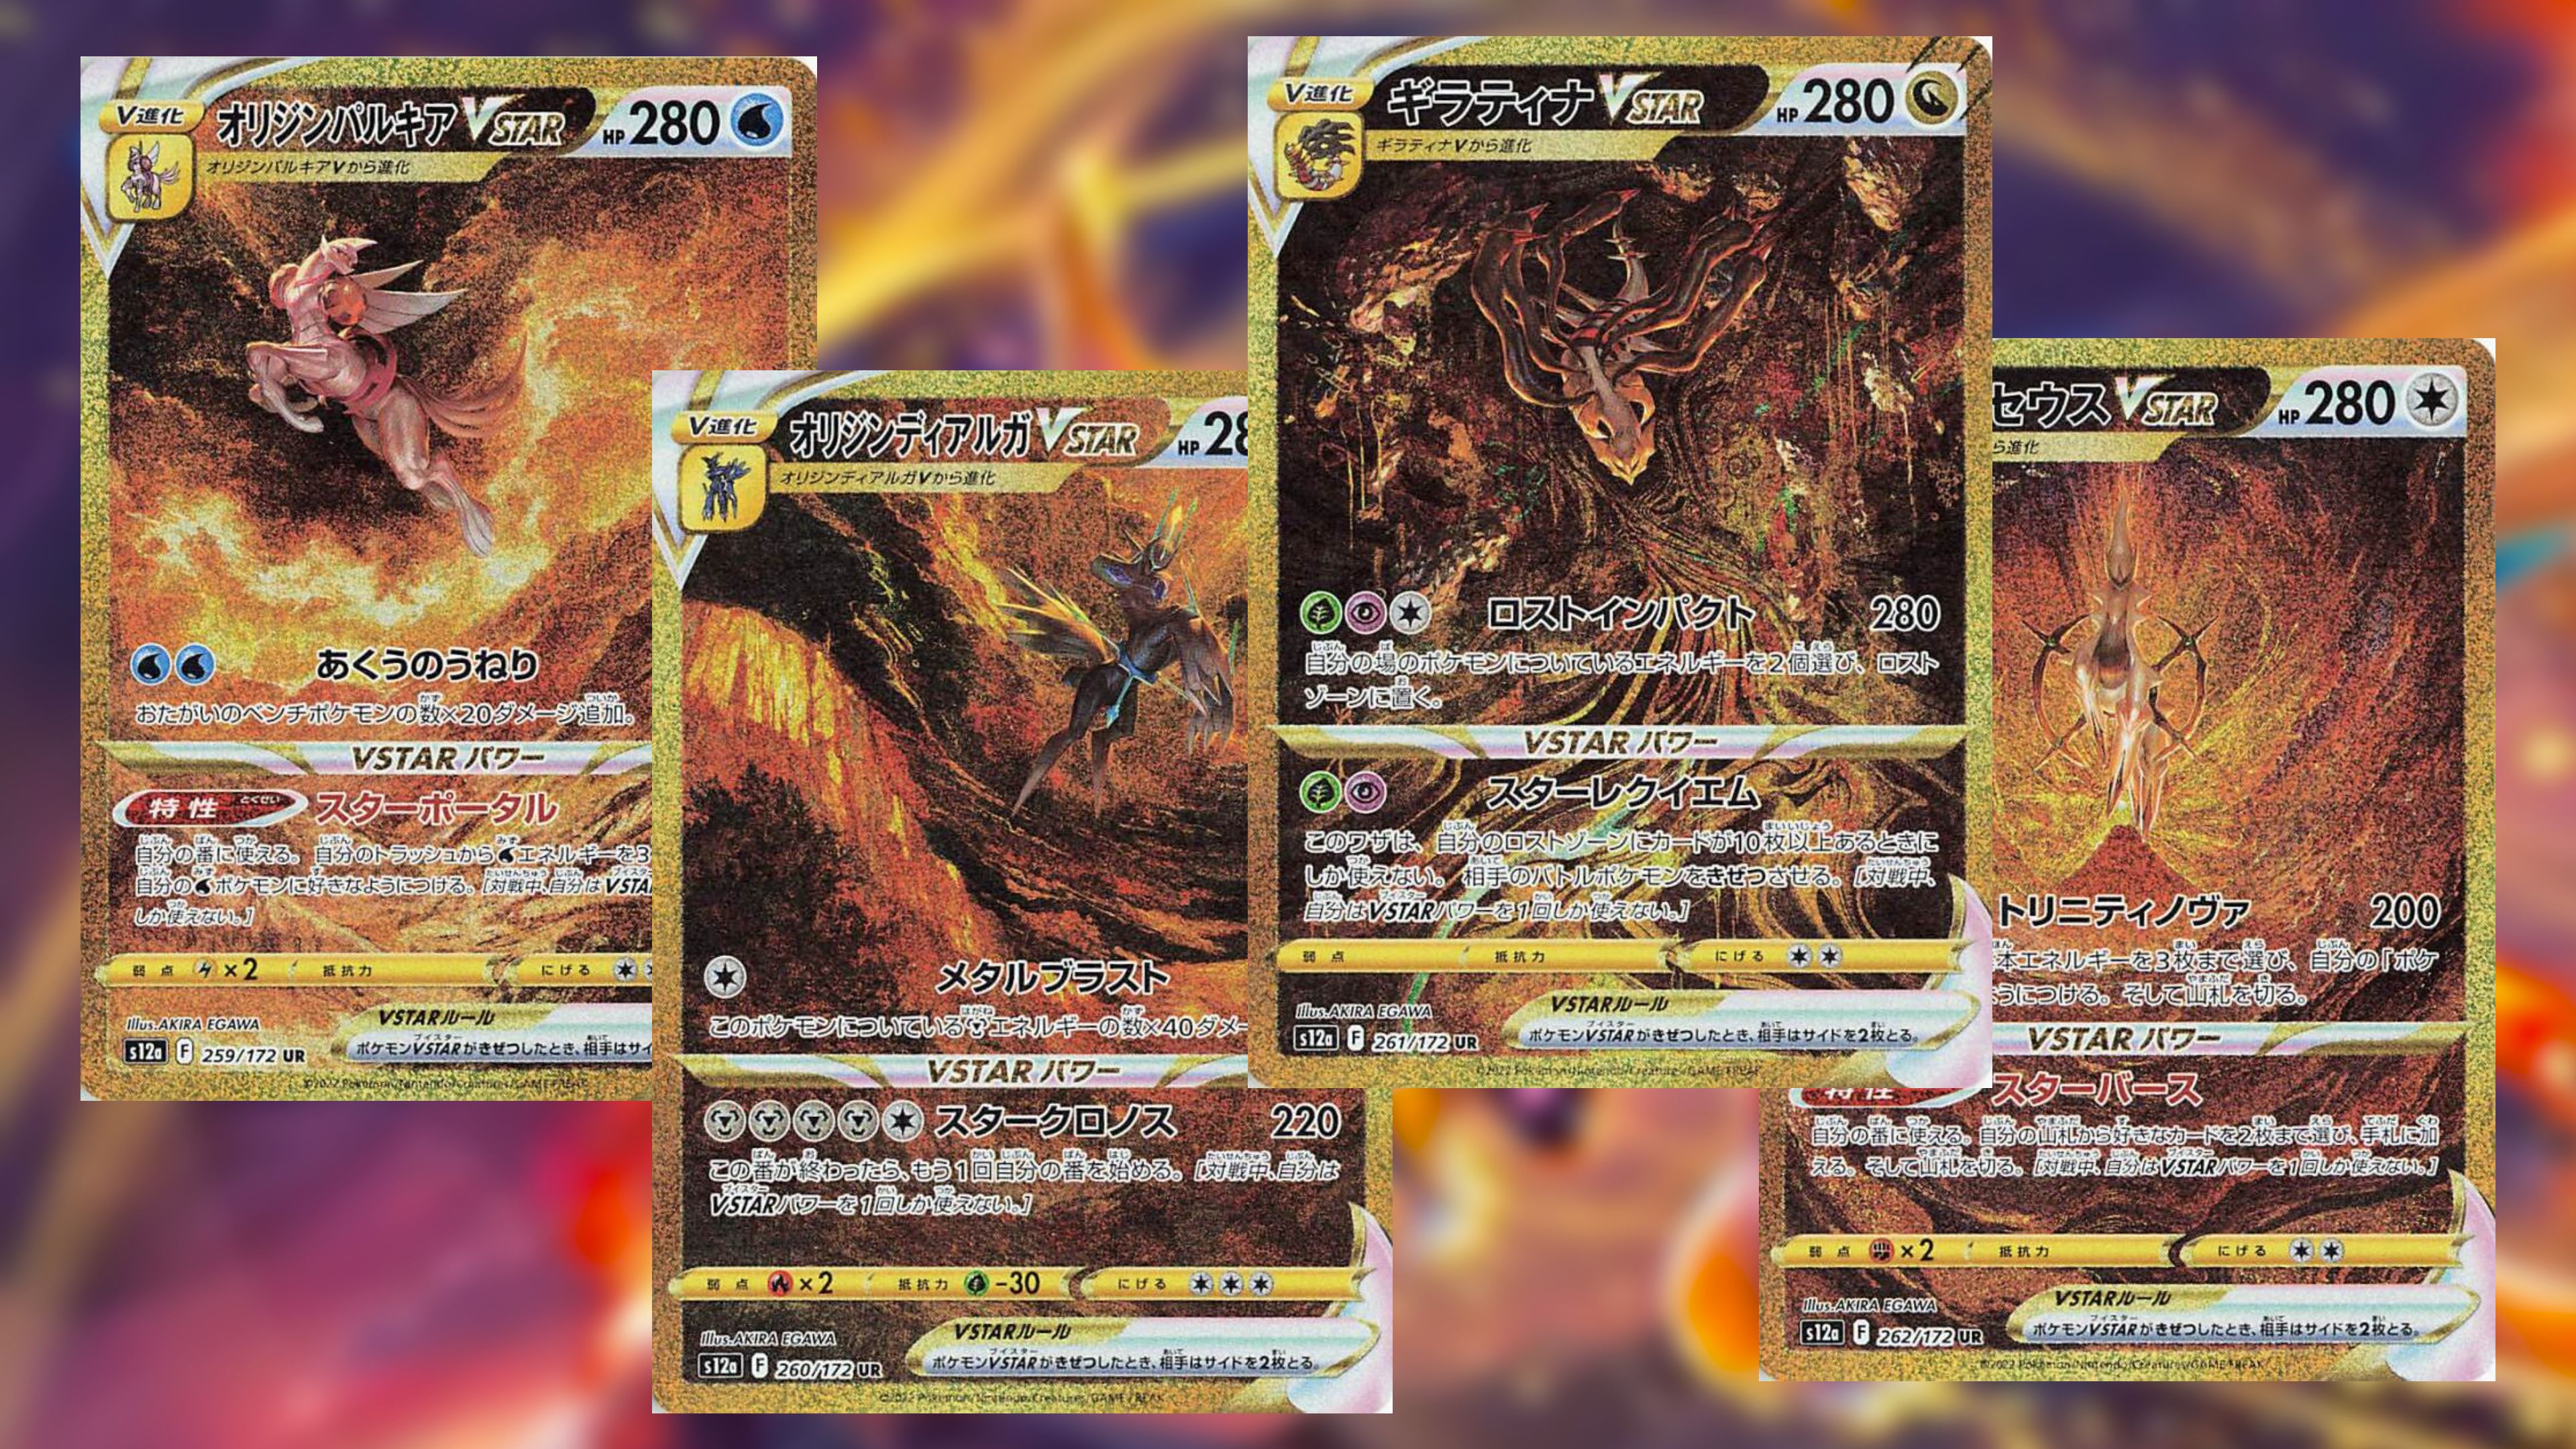 The four Secret Ultra Rare cards in VSTAR Universe from the Pokémon TCG.